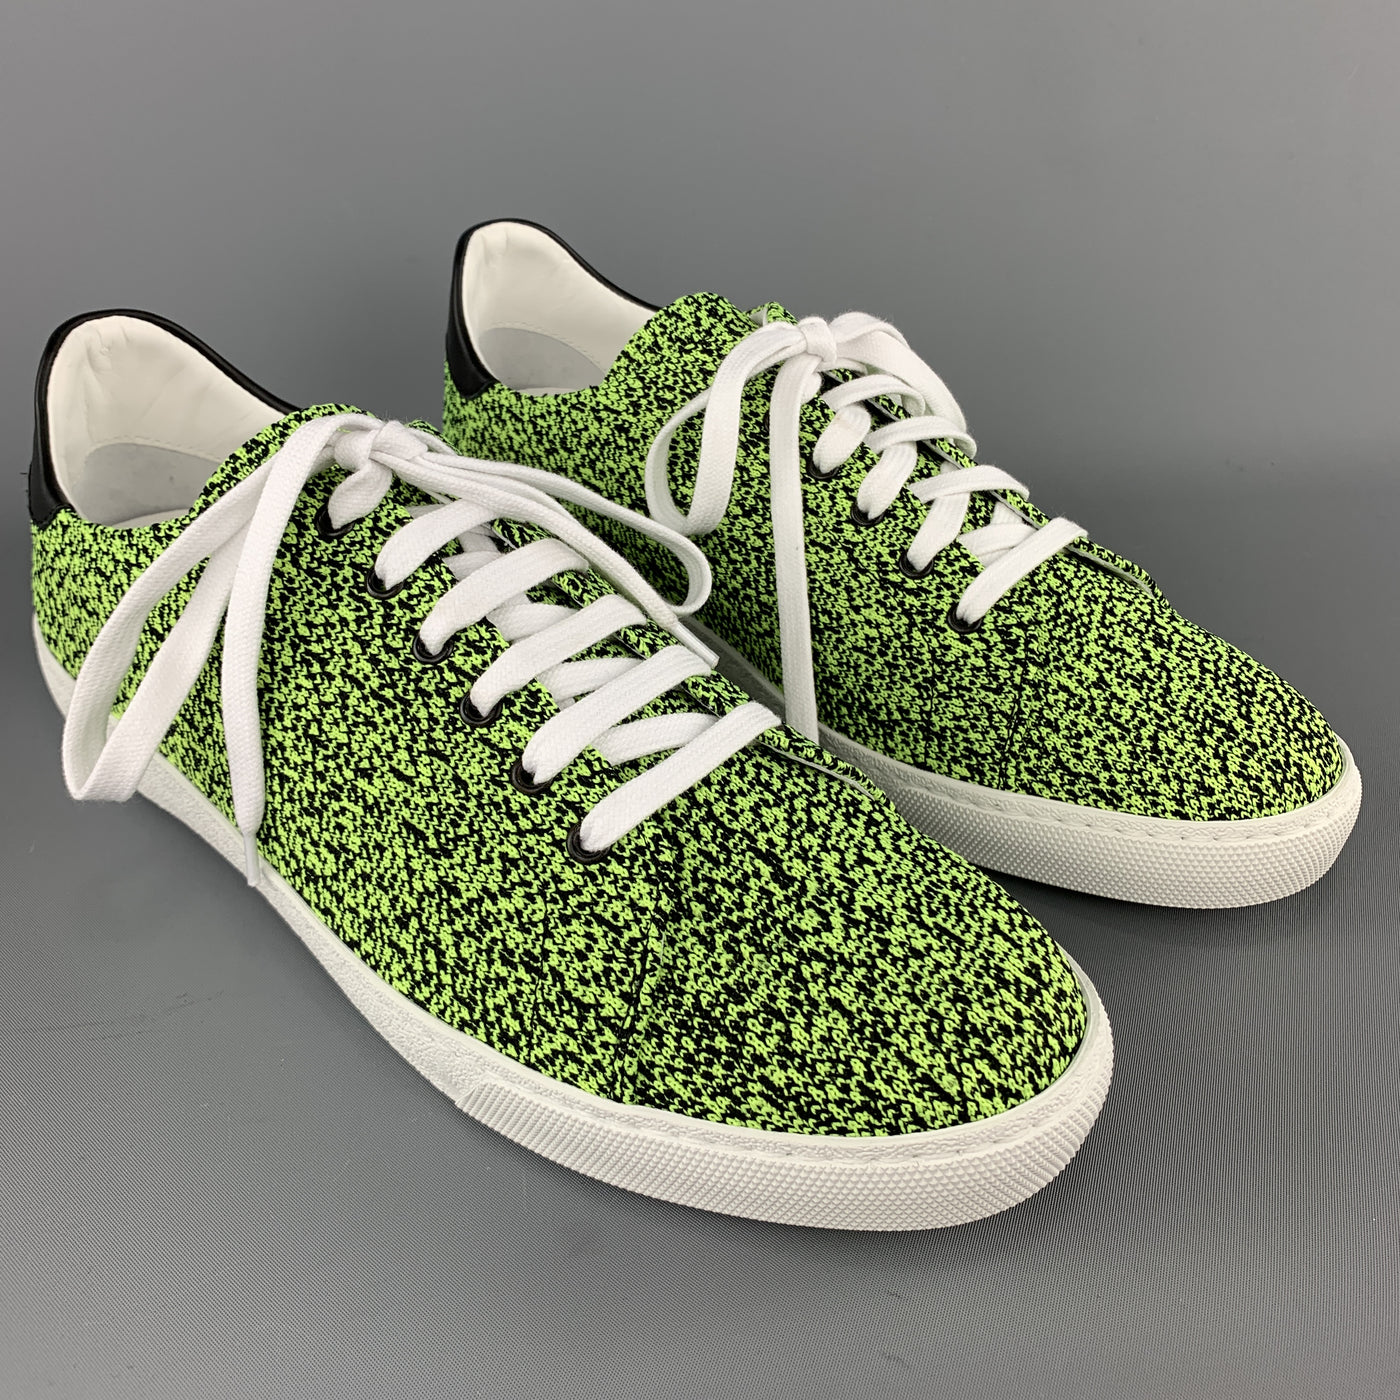 BARNEY'S NEW YORK Size 10 Lime Green & Black Heather Woven Lace Up Sneakers